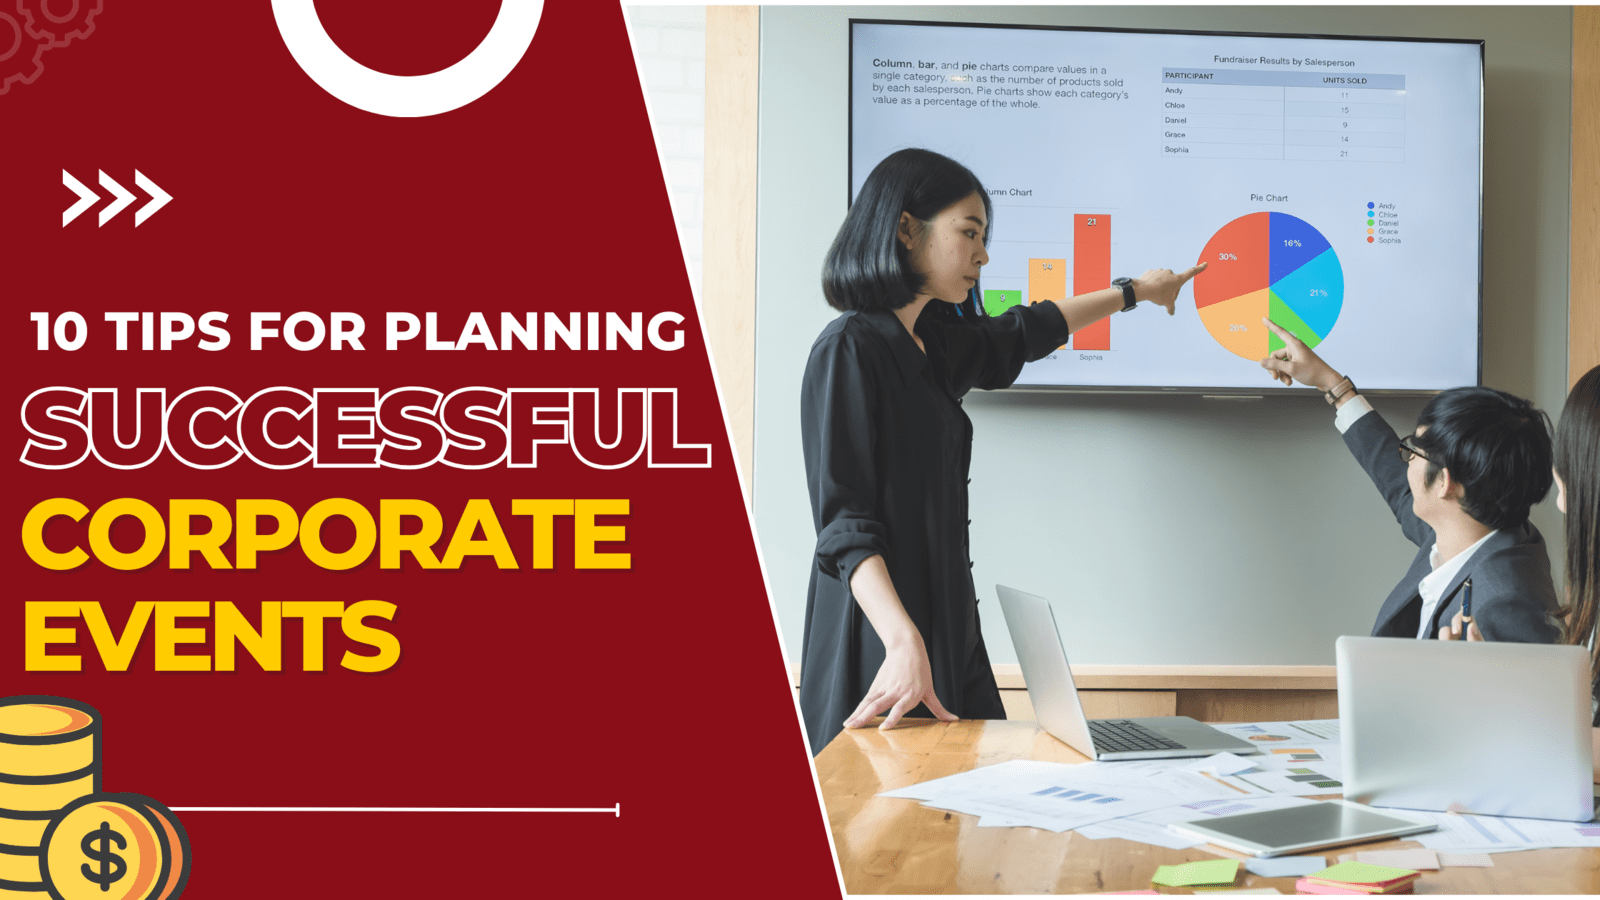 10 Tips for Planning Successful Corporate Events 